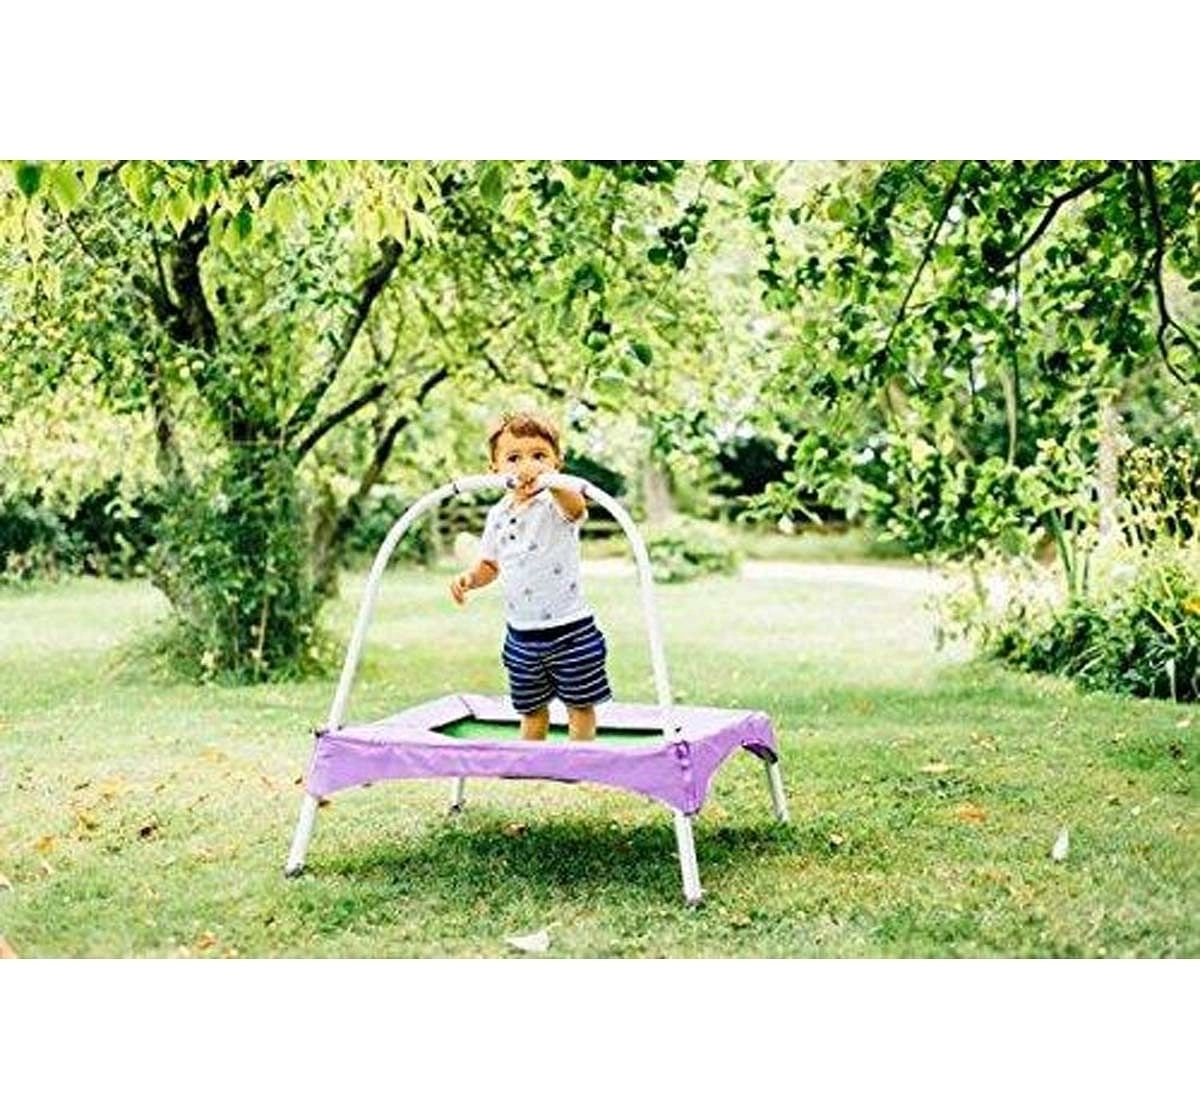 Plum Junior Bouncer With Handle Baby Gear for Kids Age 18M +